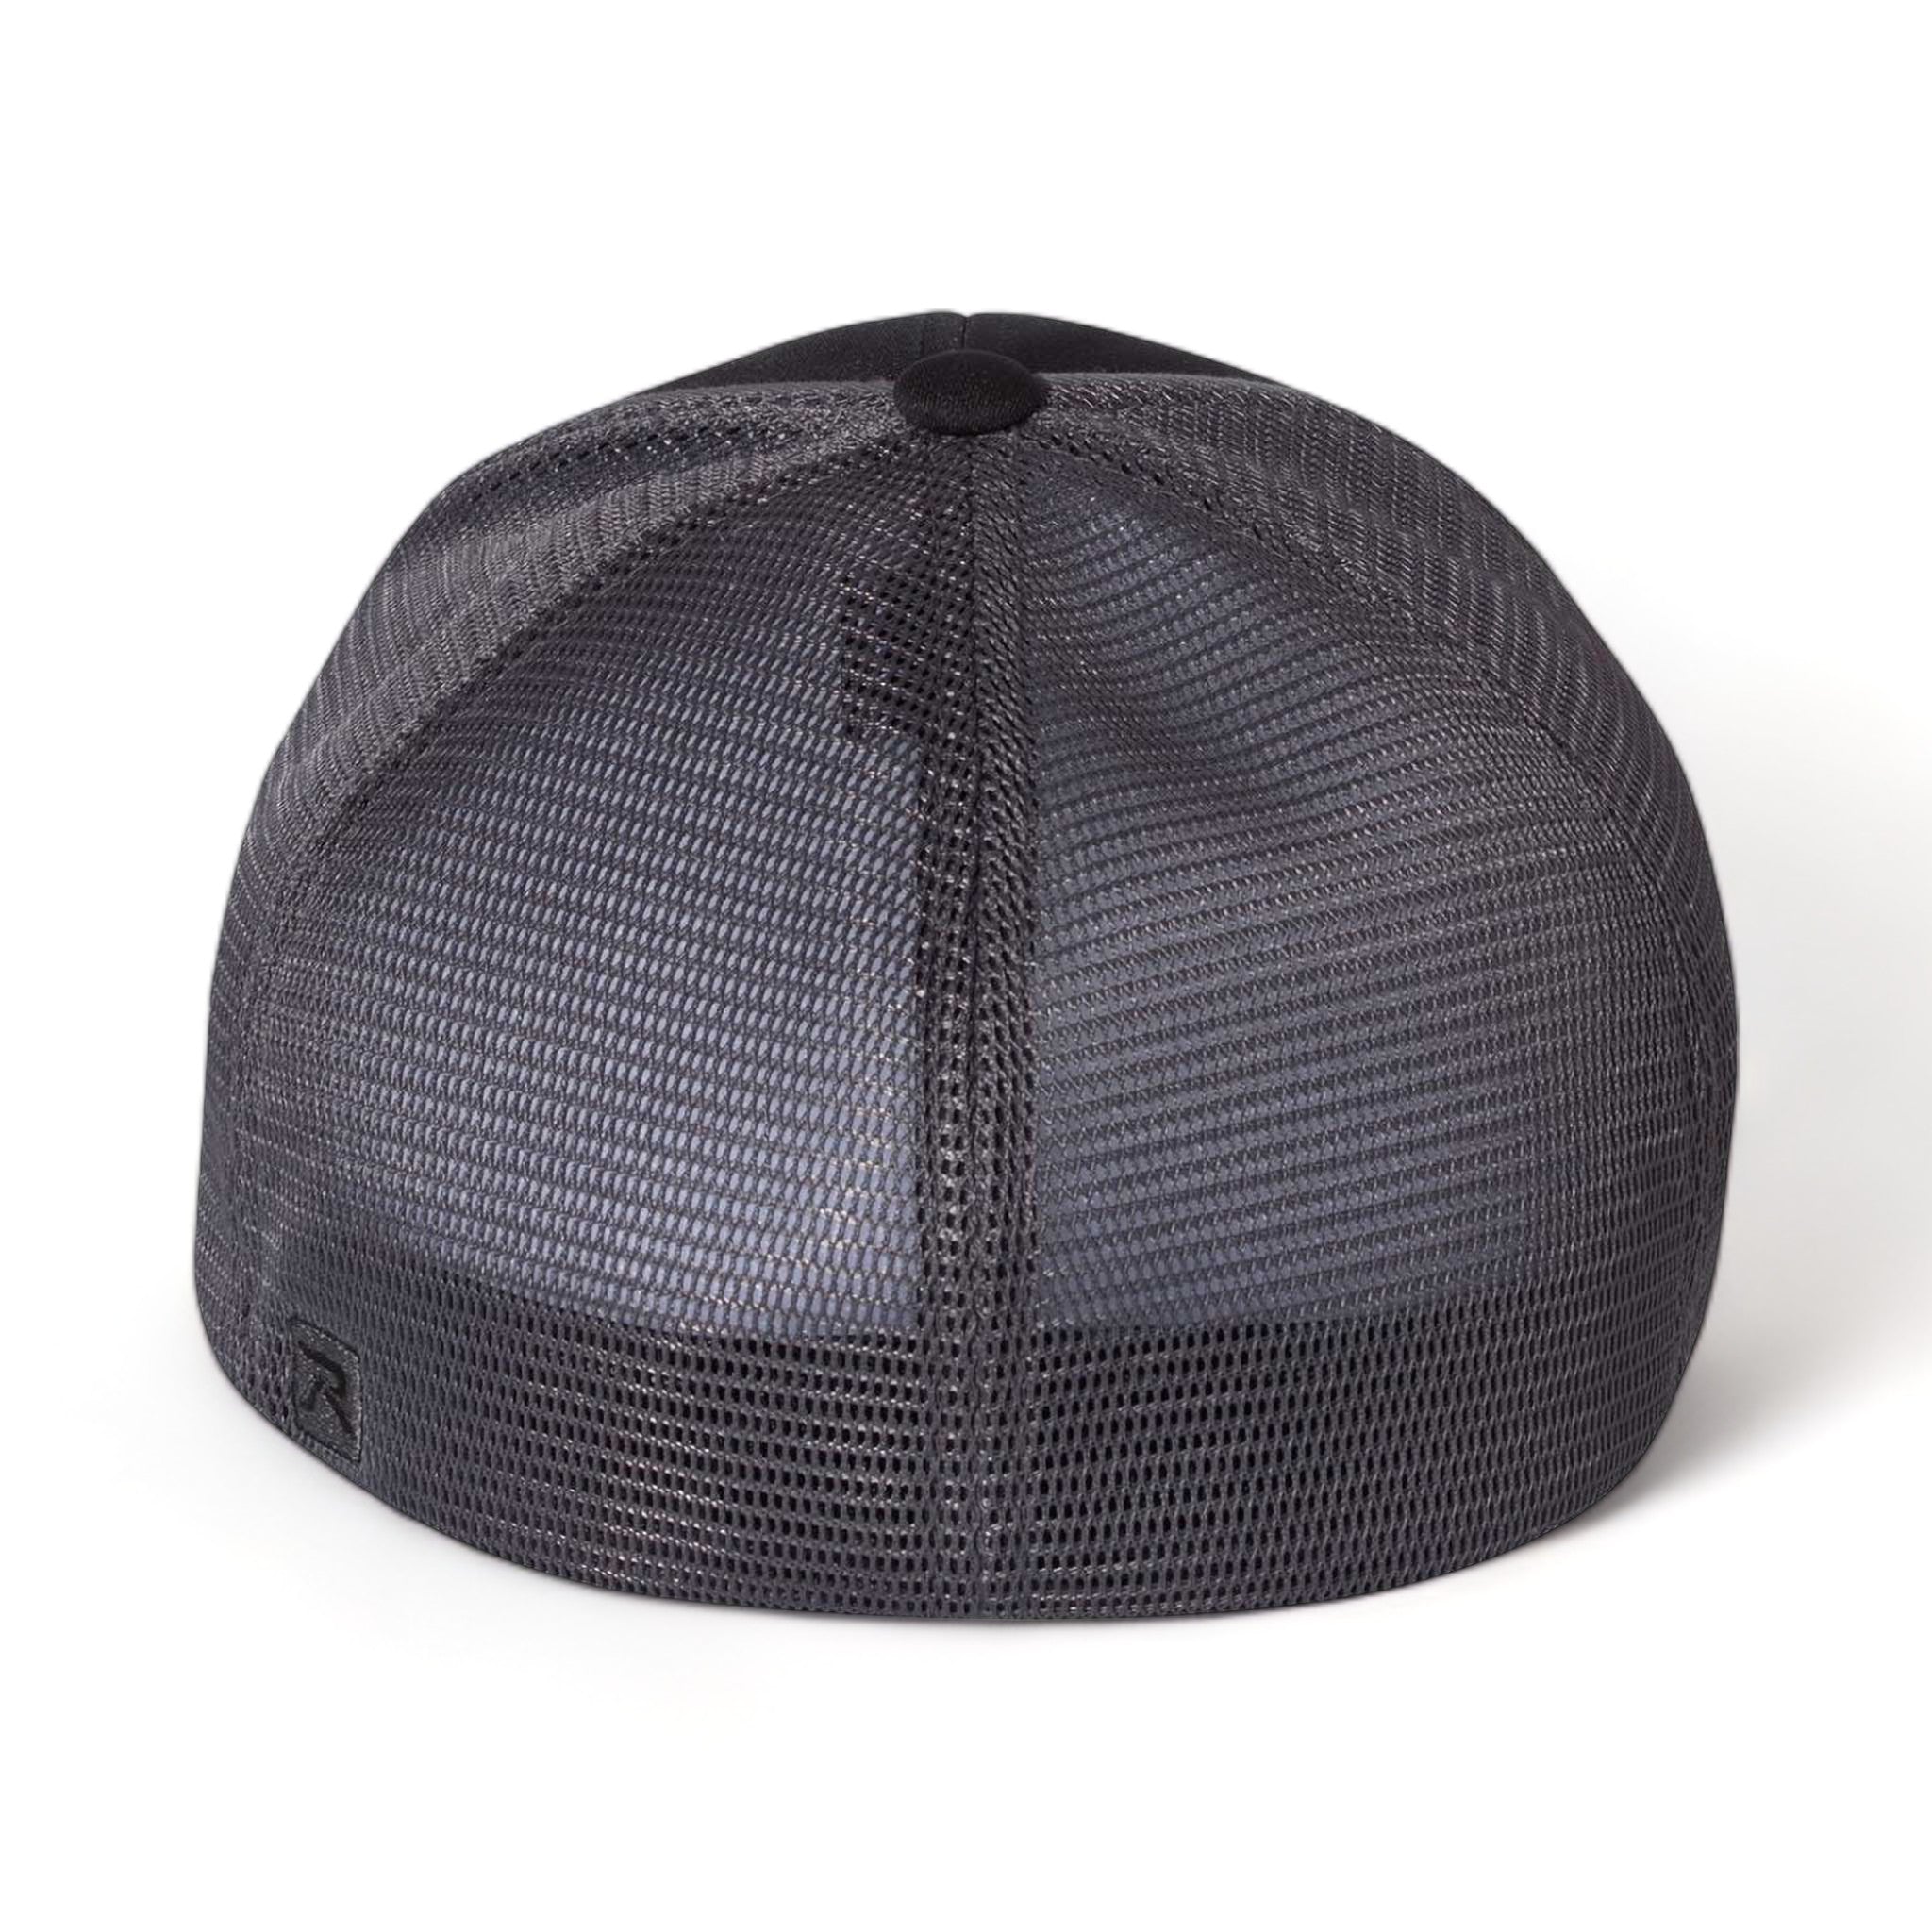 Back view of Richardson 172 custom hat in black and charcoal split